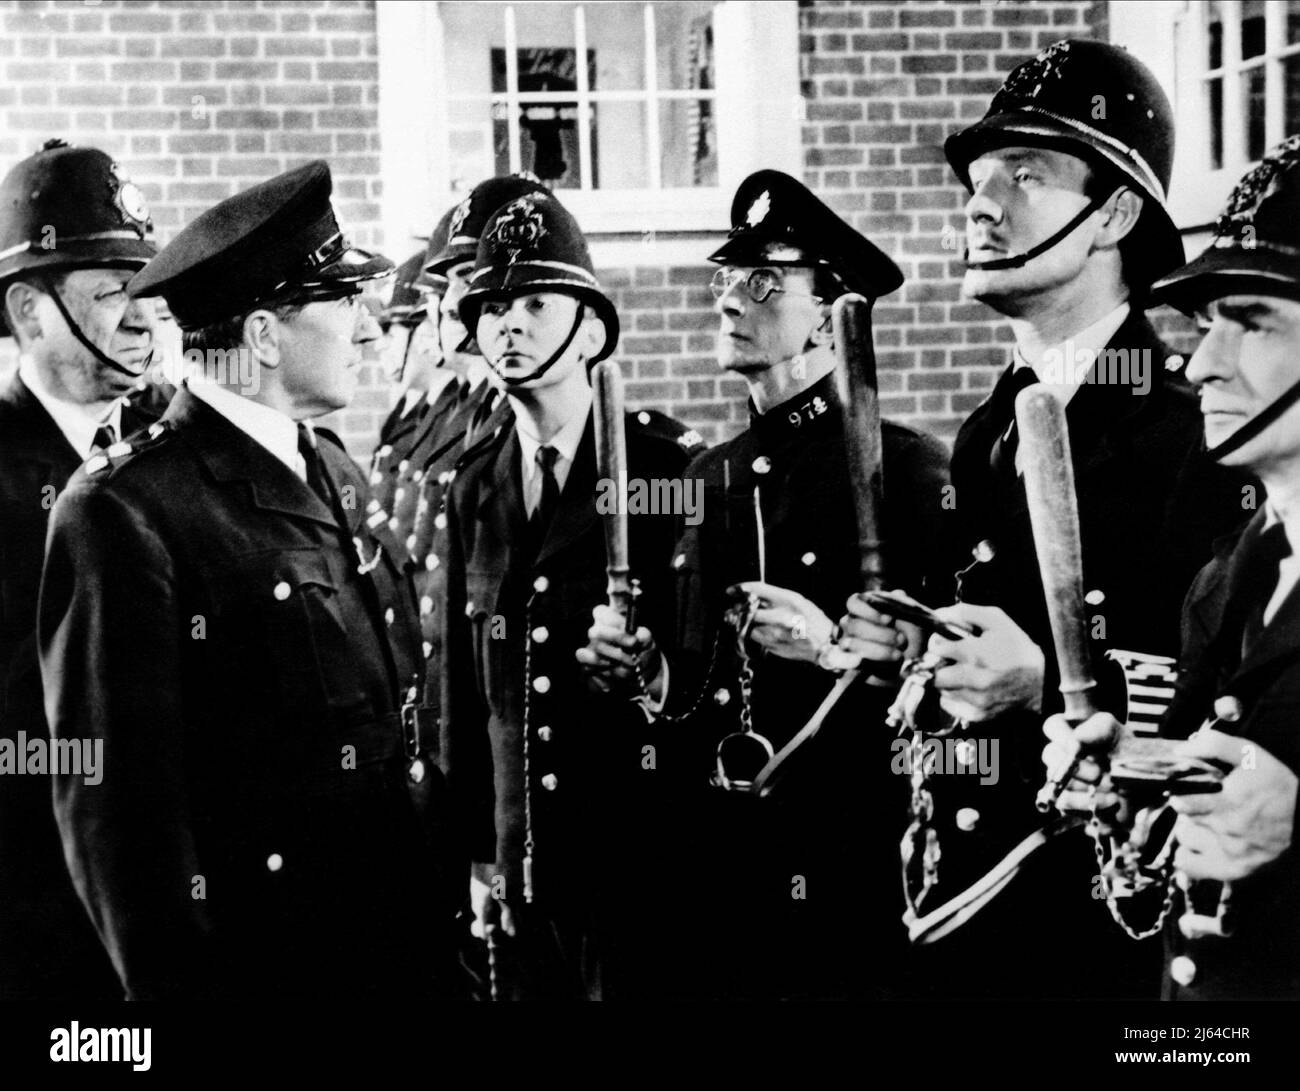 JAMES,BARKER,WILLIAMS,HAWTREY,PHILLIPS,CONNOR, CARRY ON CONSTABLE, 1960 Stock Photo